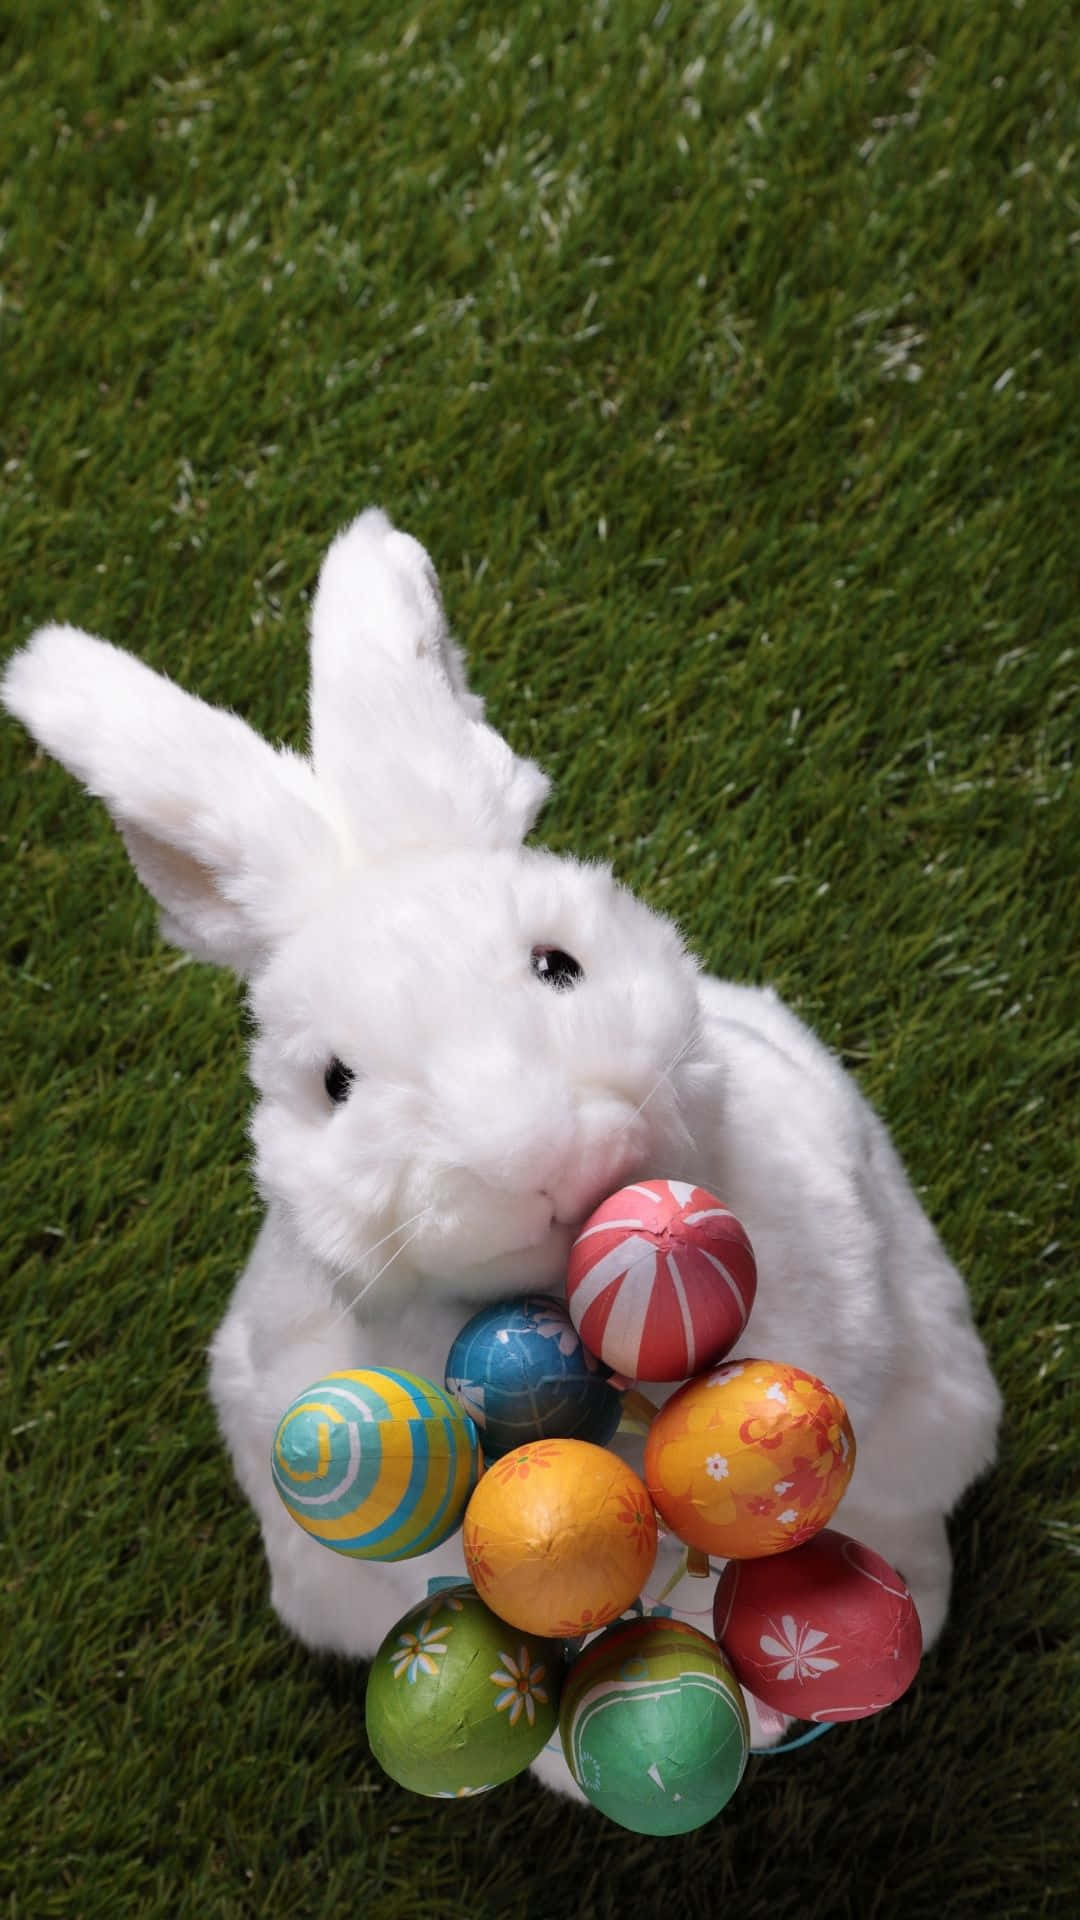 A Cute Easter Bunny Just In Time For The Holiday